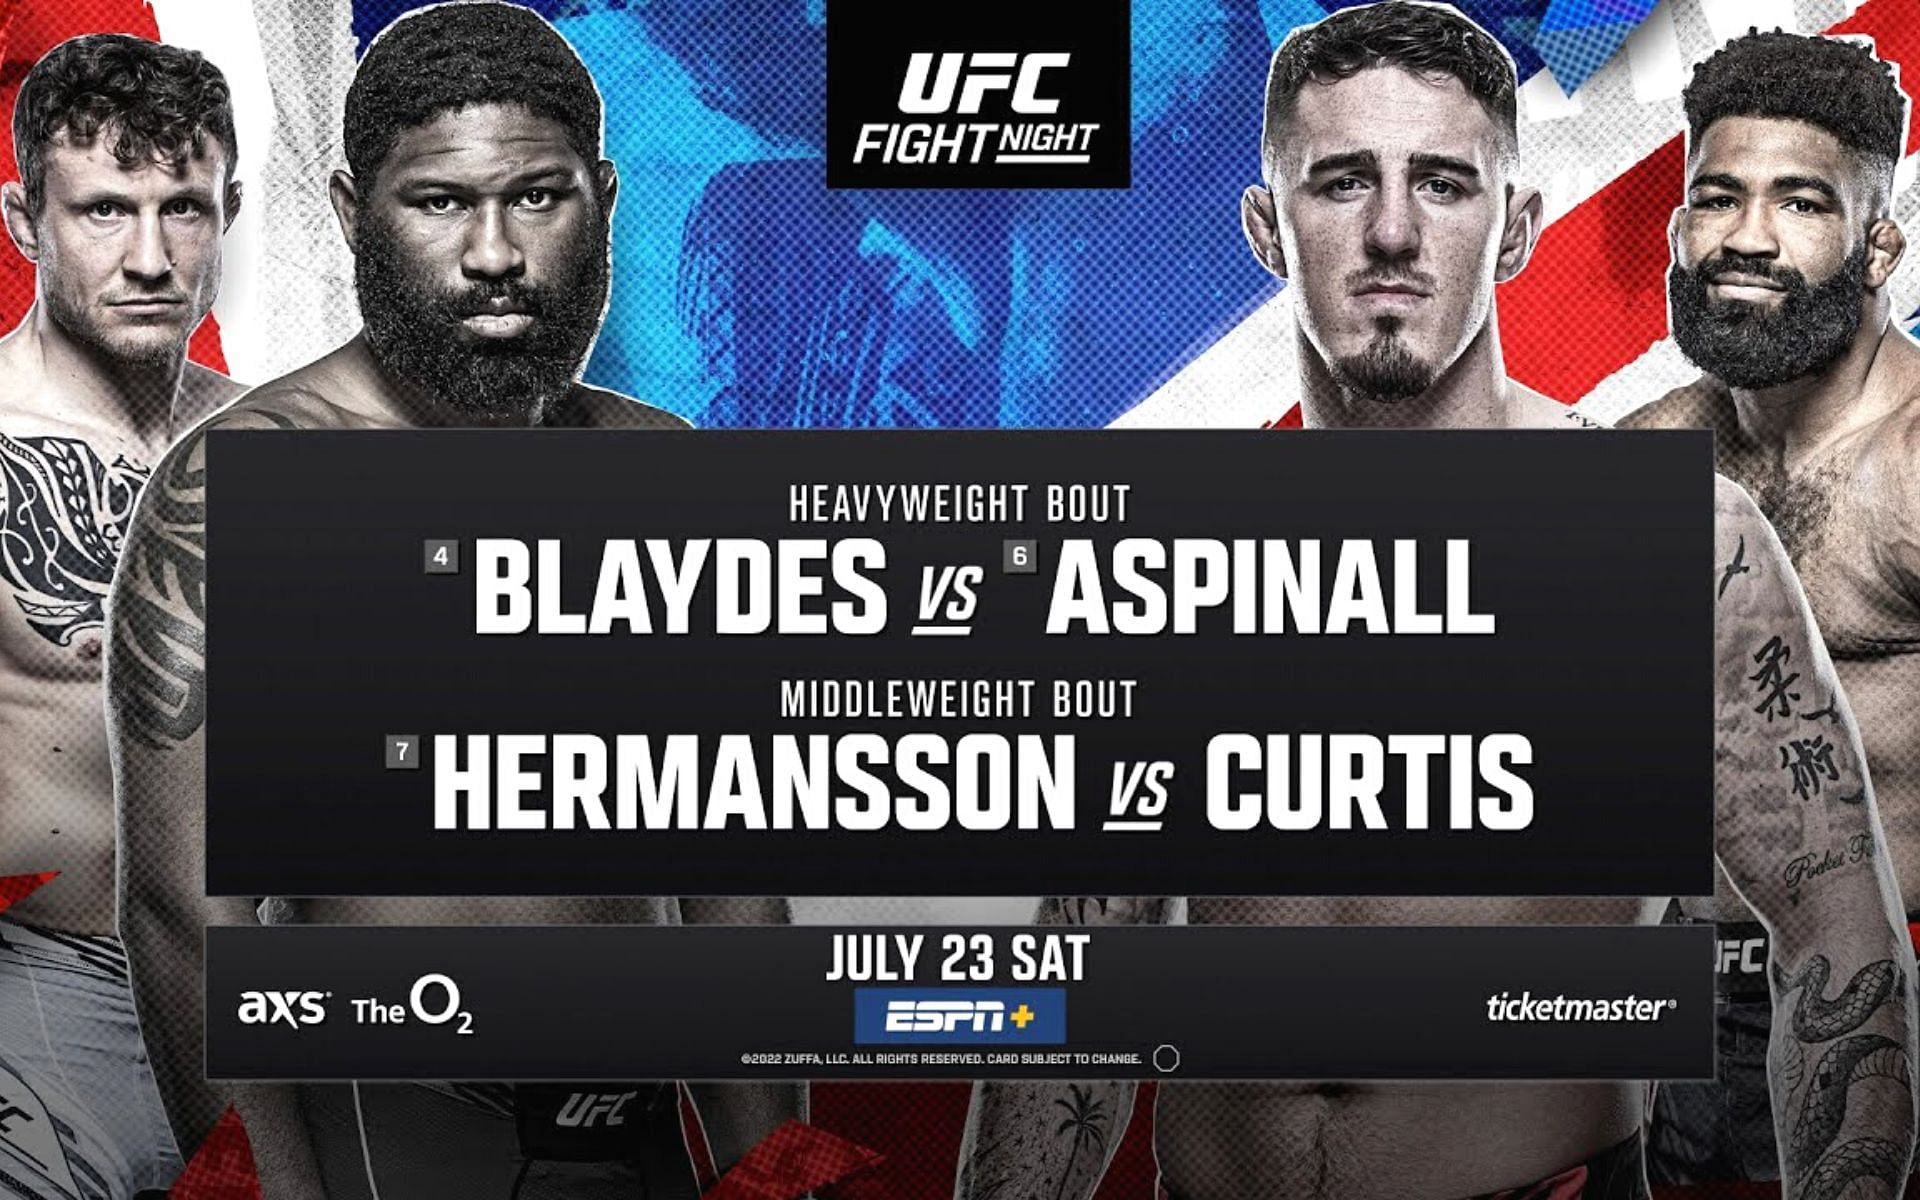 Whos fighting in the UFC card tonight, July 23, 2022?